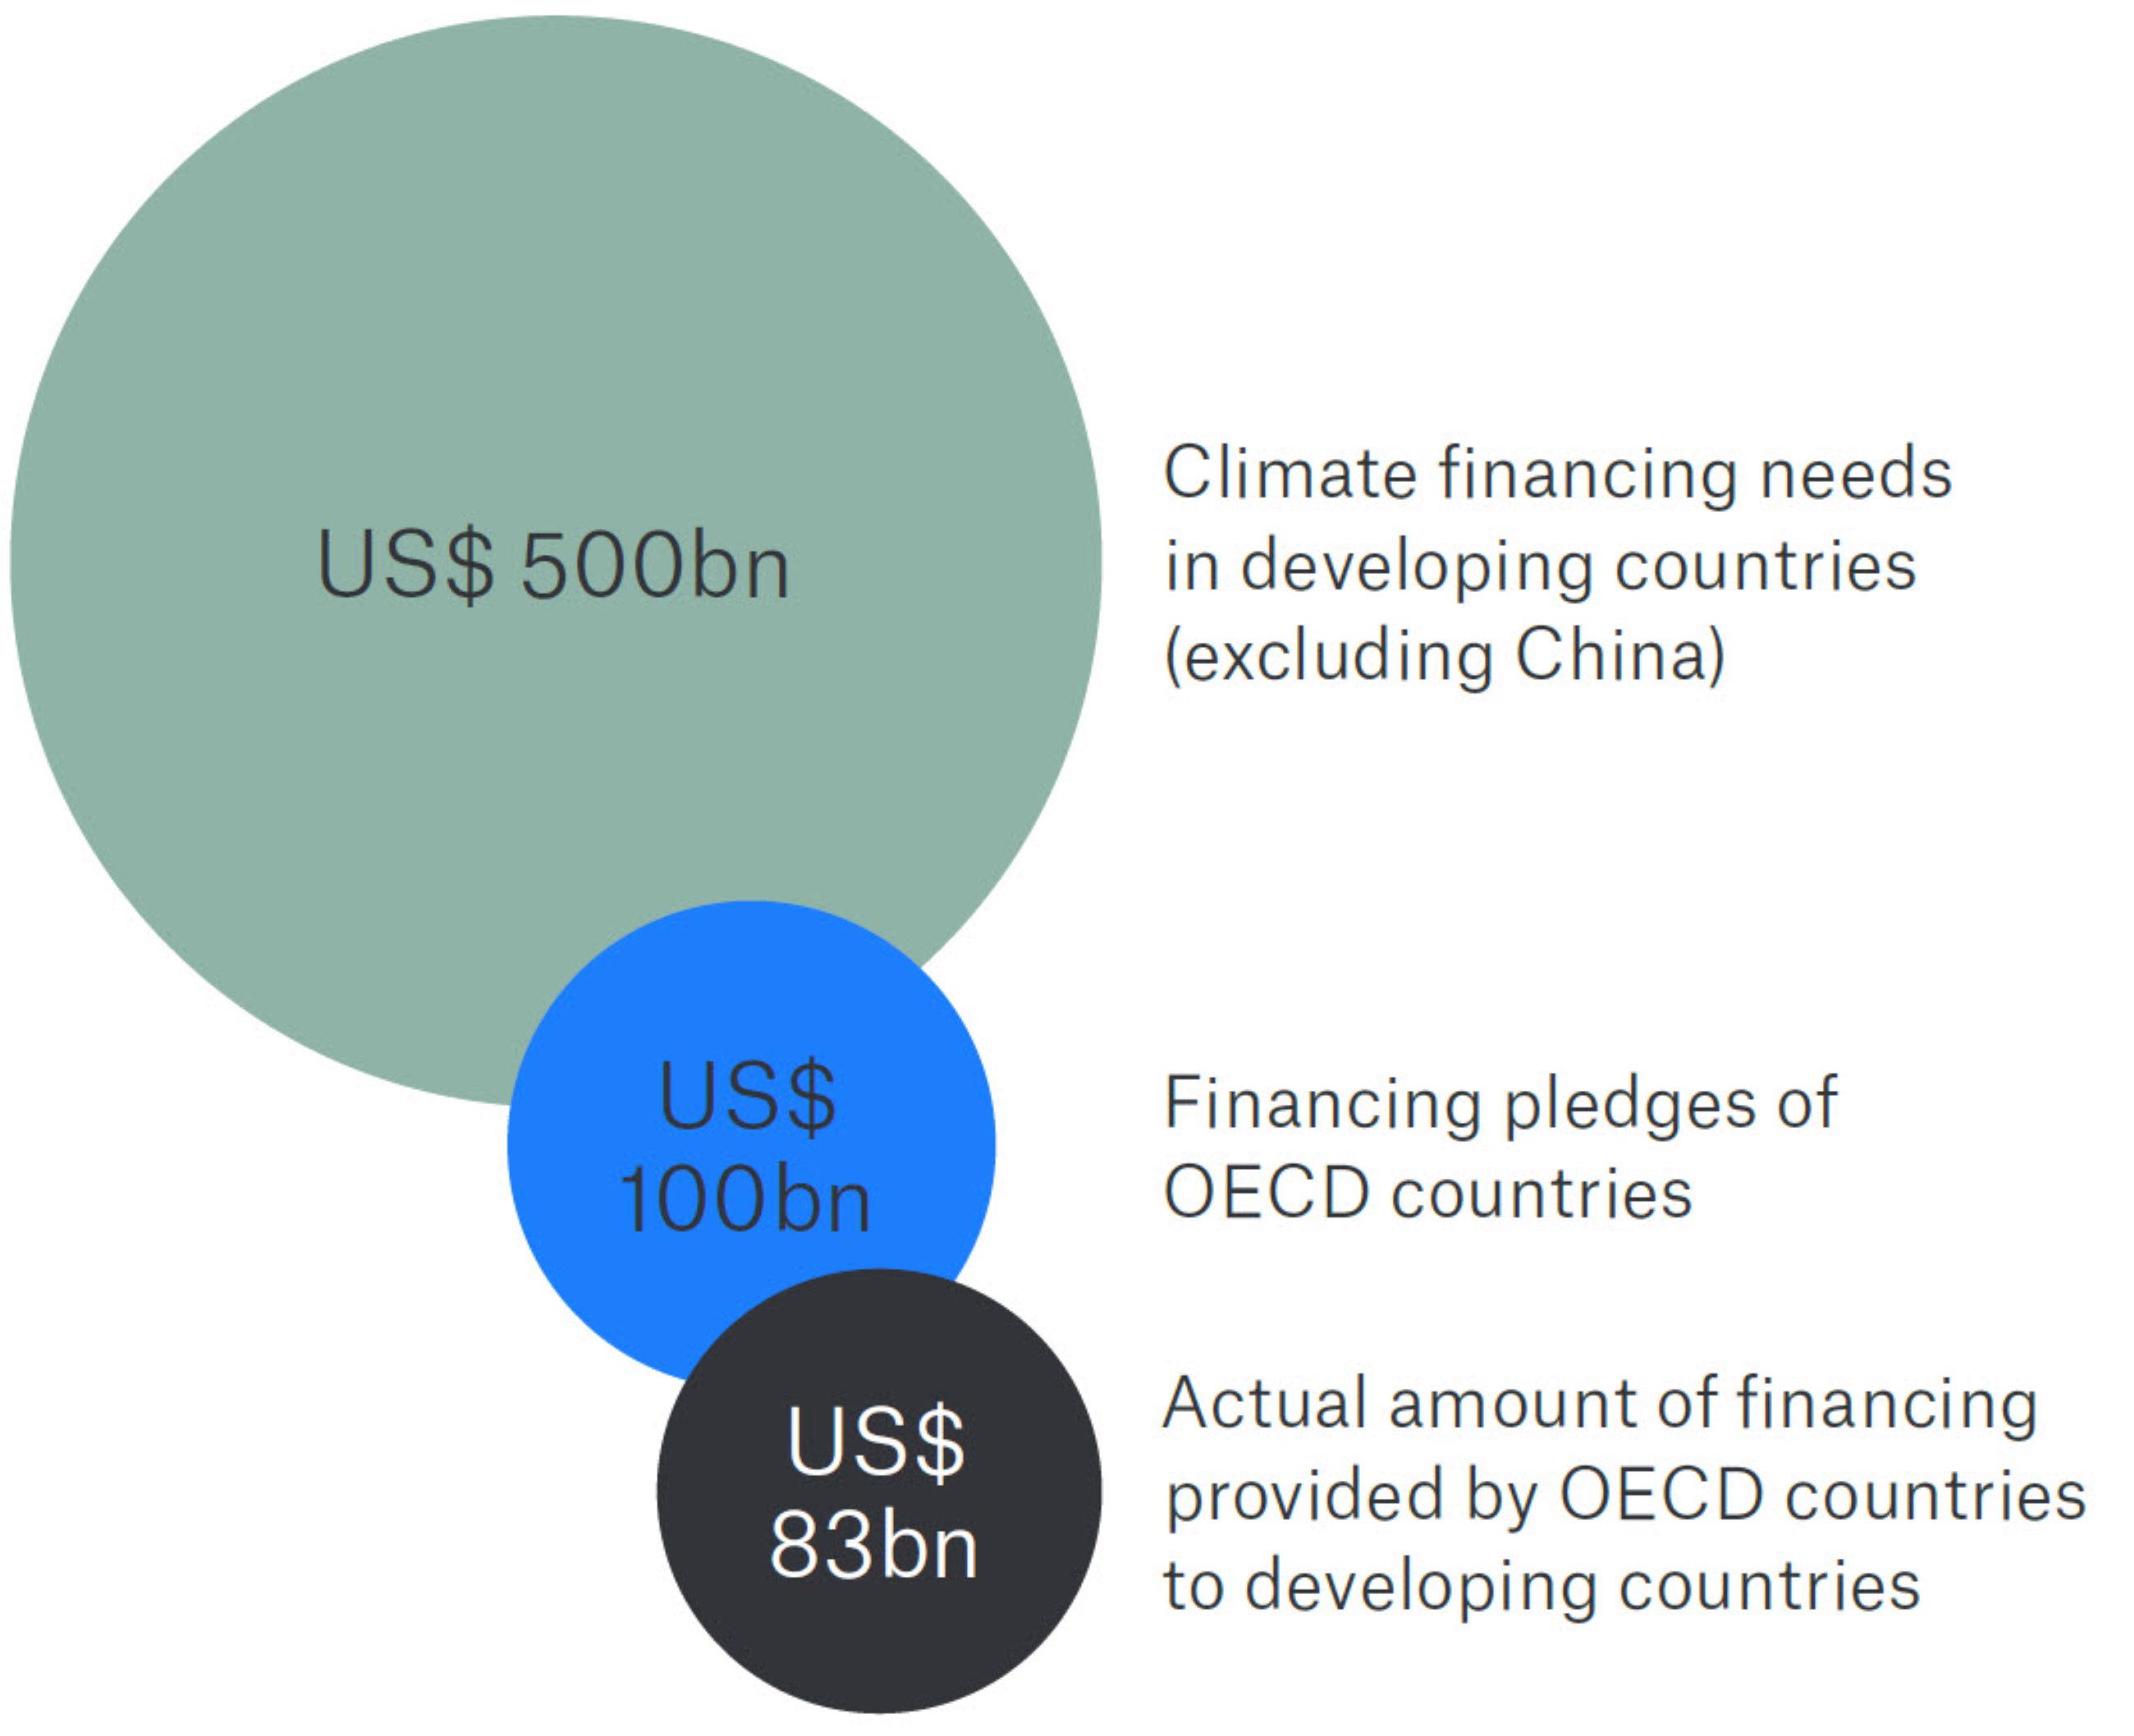 Annual climate financing gap